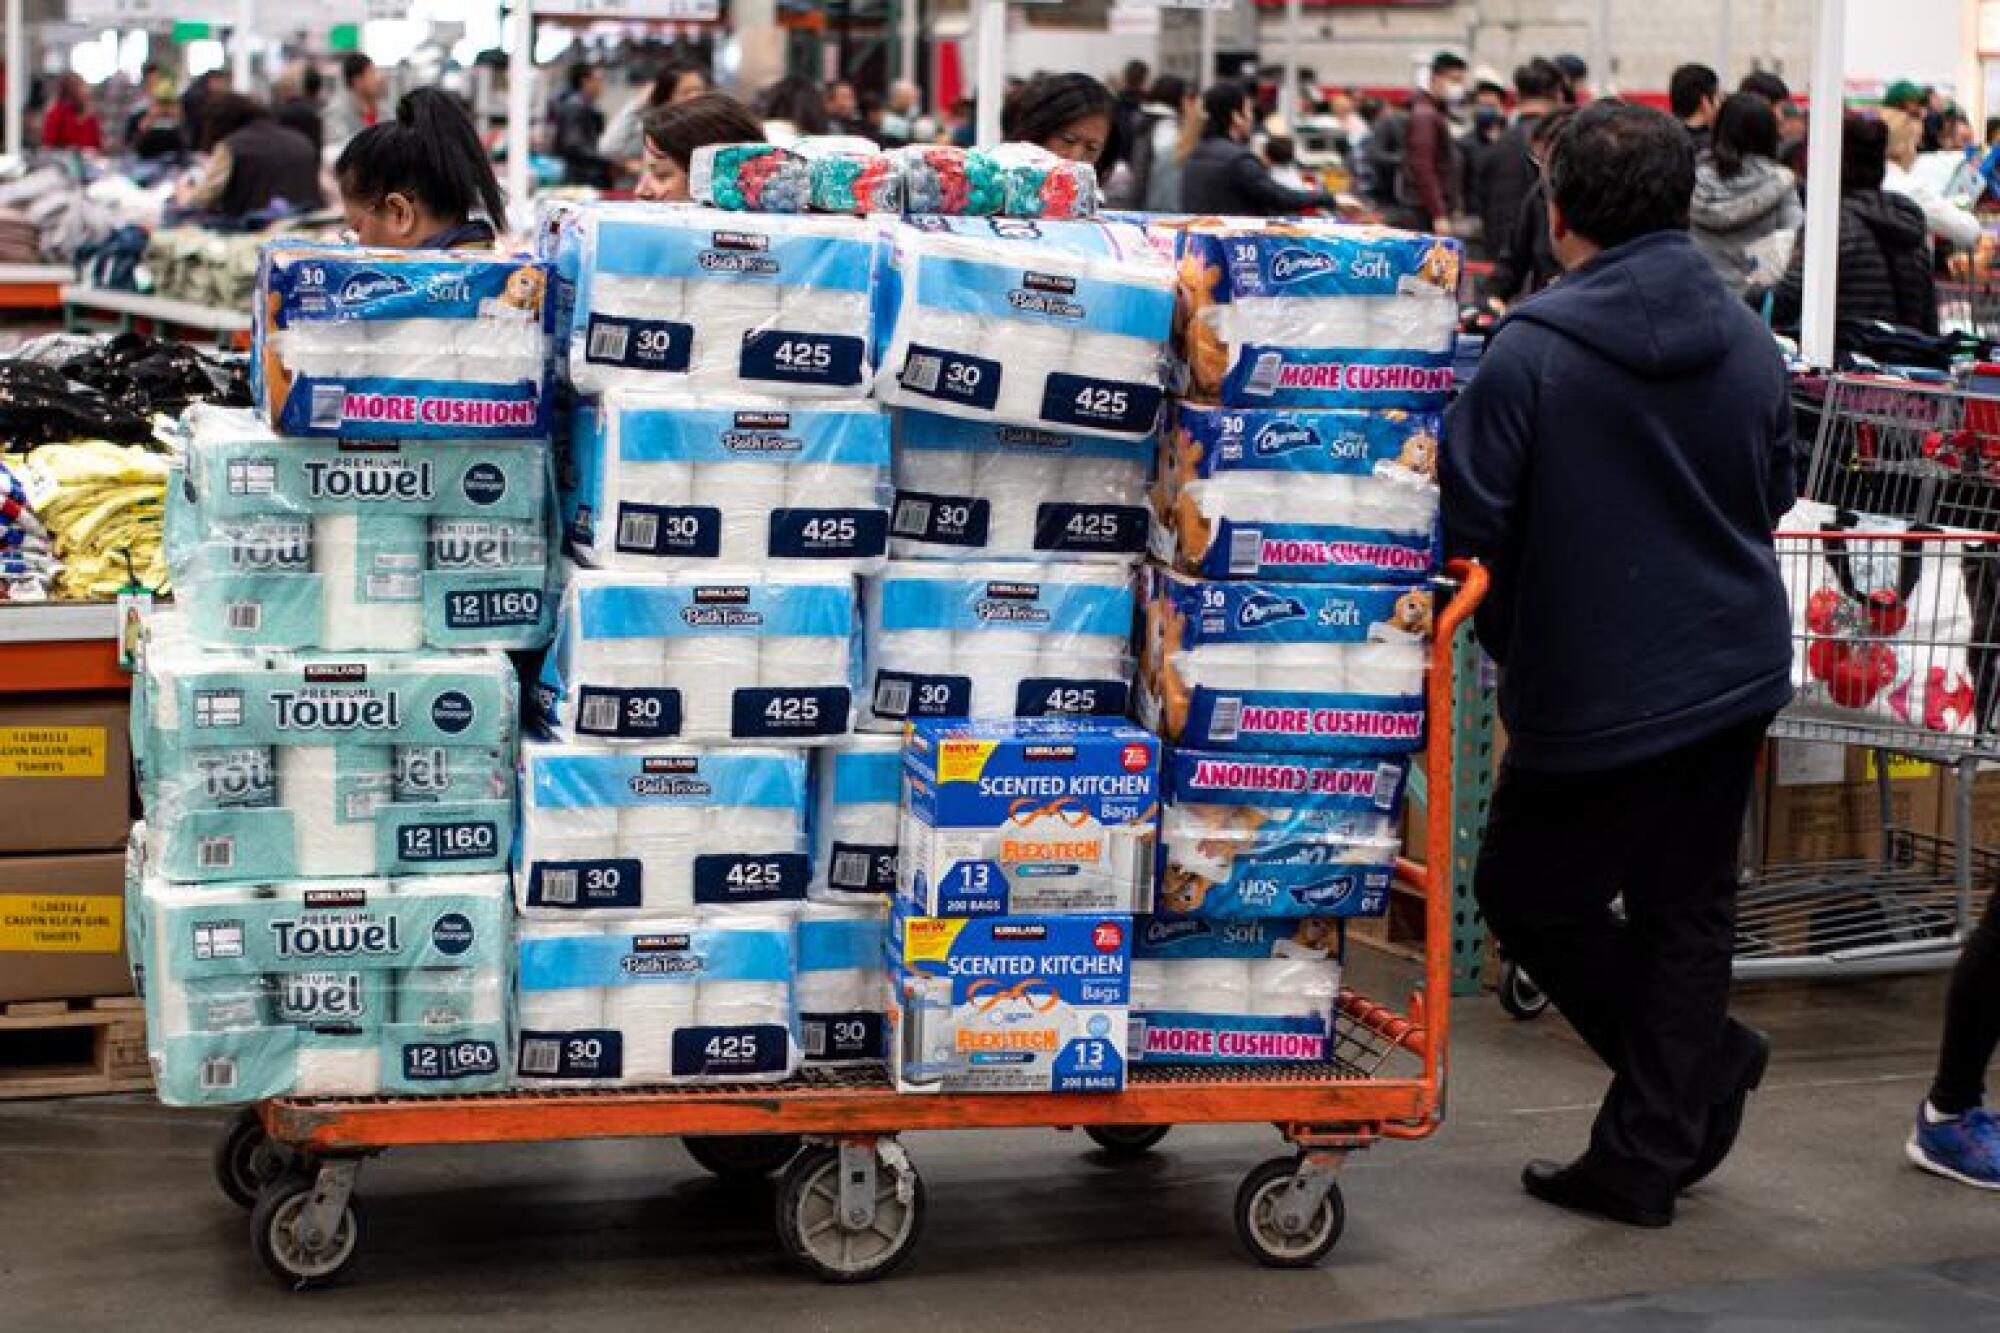 Stacks of paper towels, toilet paper and trash bags on a flatbed cart in Costco